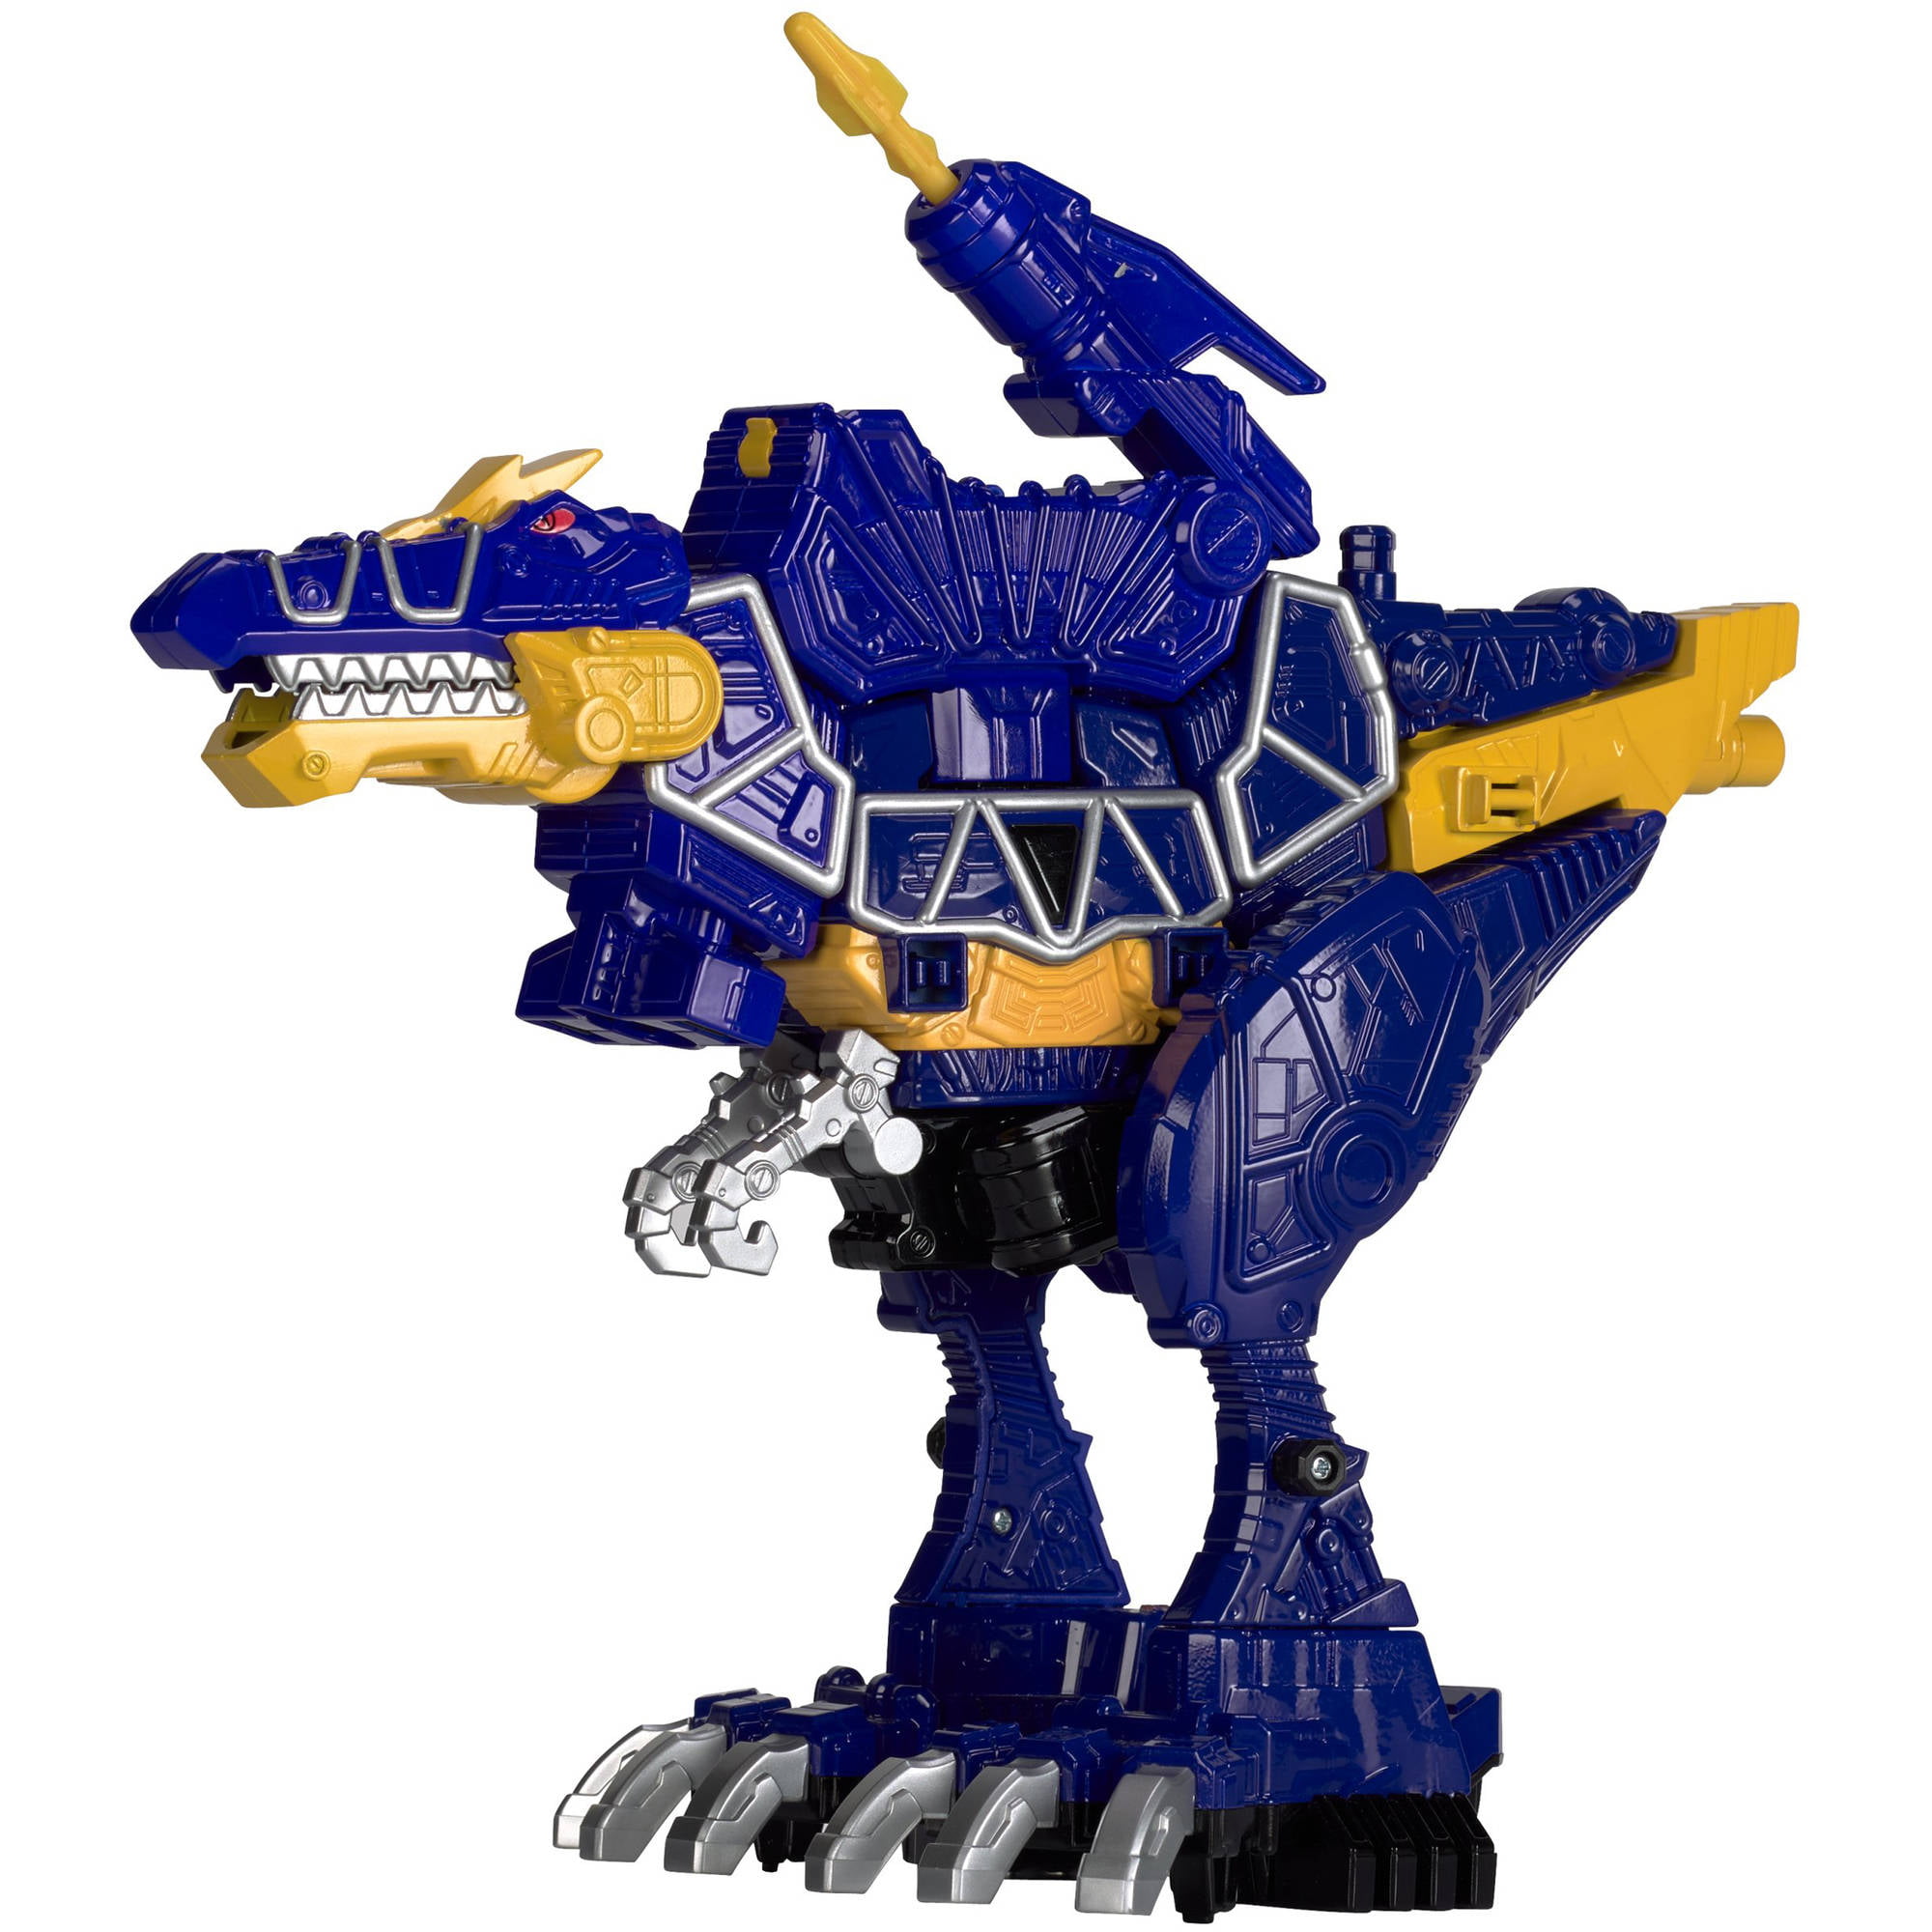 Power Rangers Dino Super Charge Deluxe Spino Zord - Walmart.com ...
